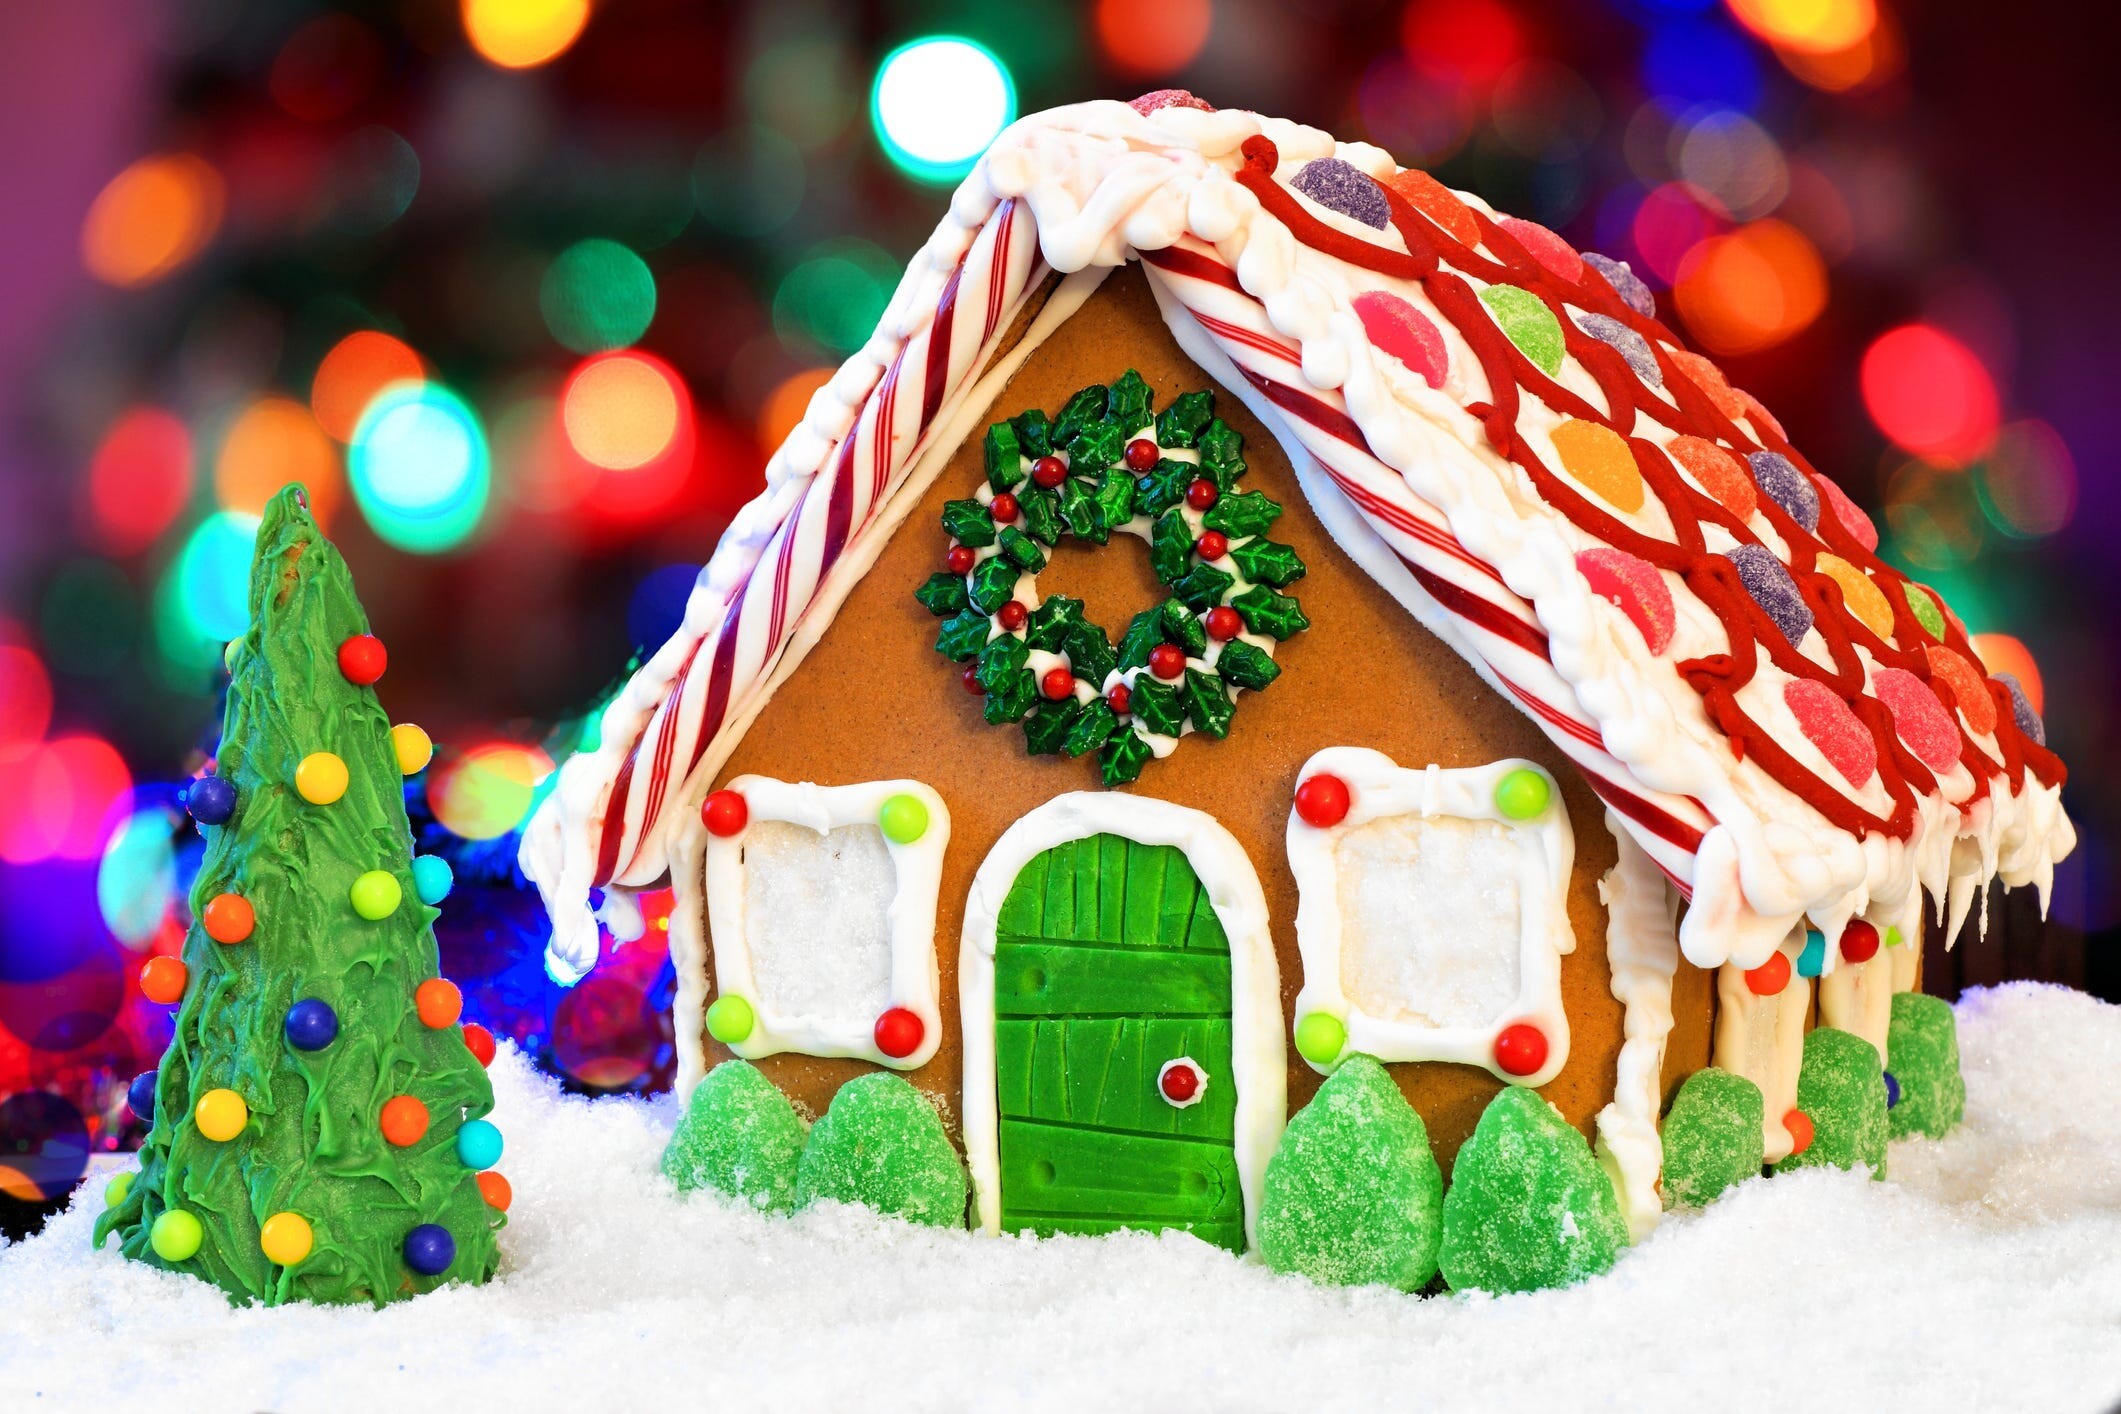 Gingerbread House: Elaborate cookie-walled houses, Gingerbread Christmas tree ornaments, Icing decorations. 2130x1420 HD Wallpaper.